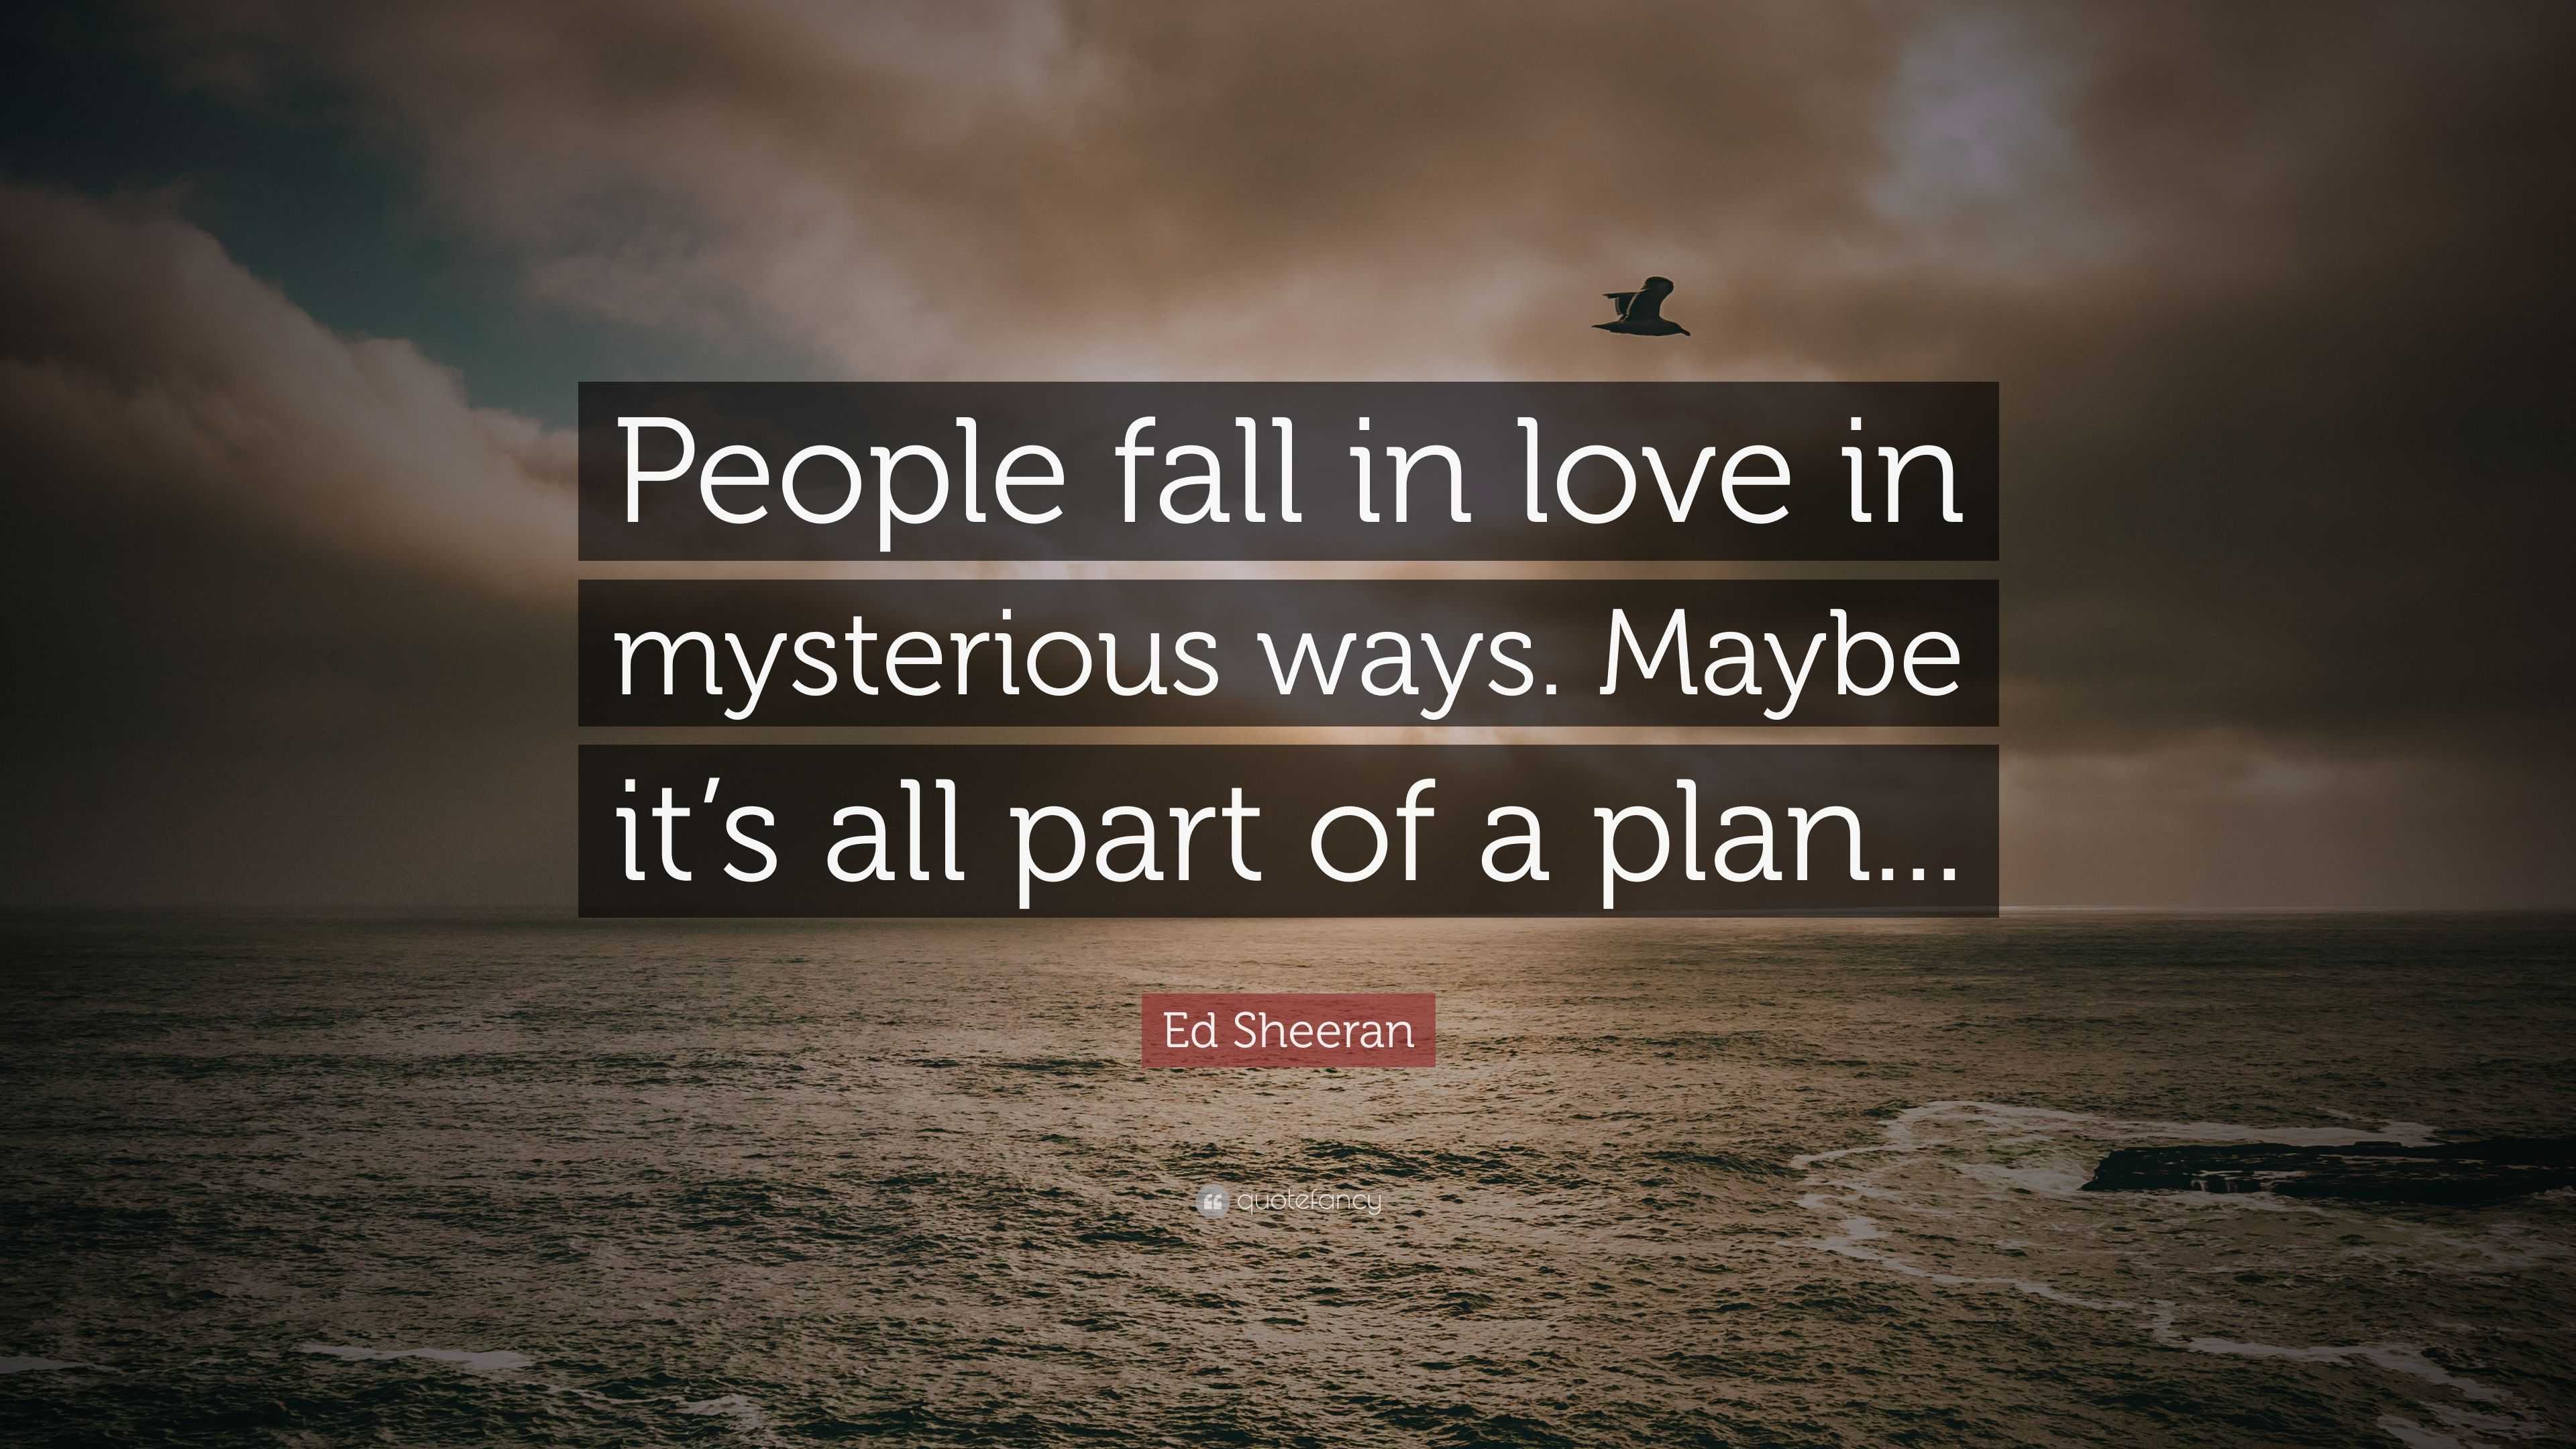 Ed Sheeran Quote “People fall in love in mysterious ways Maybe it s all